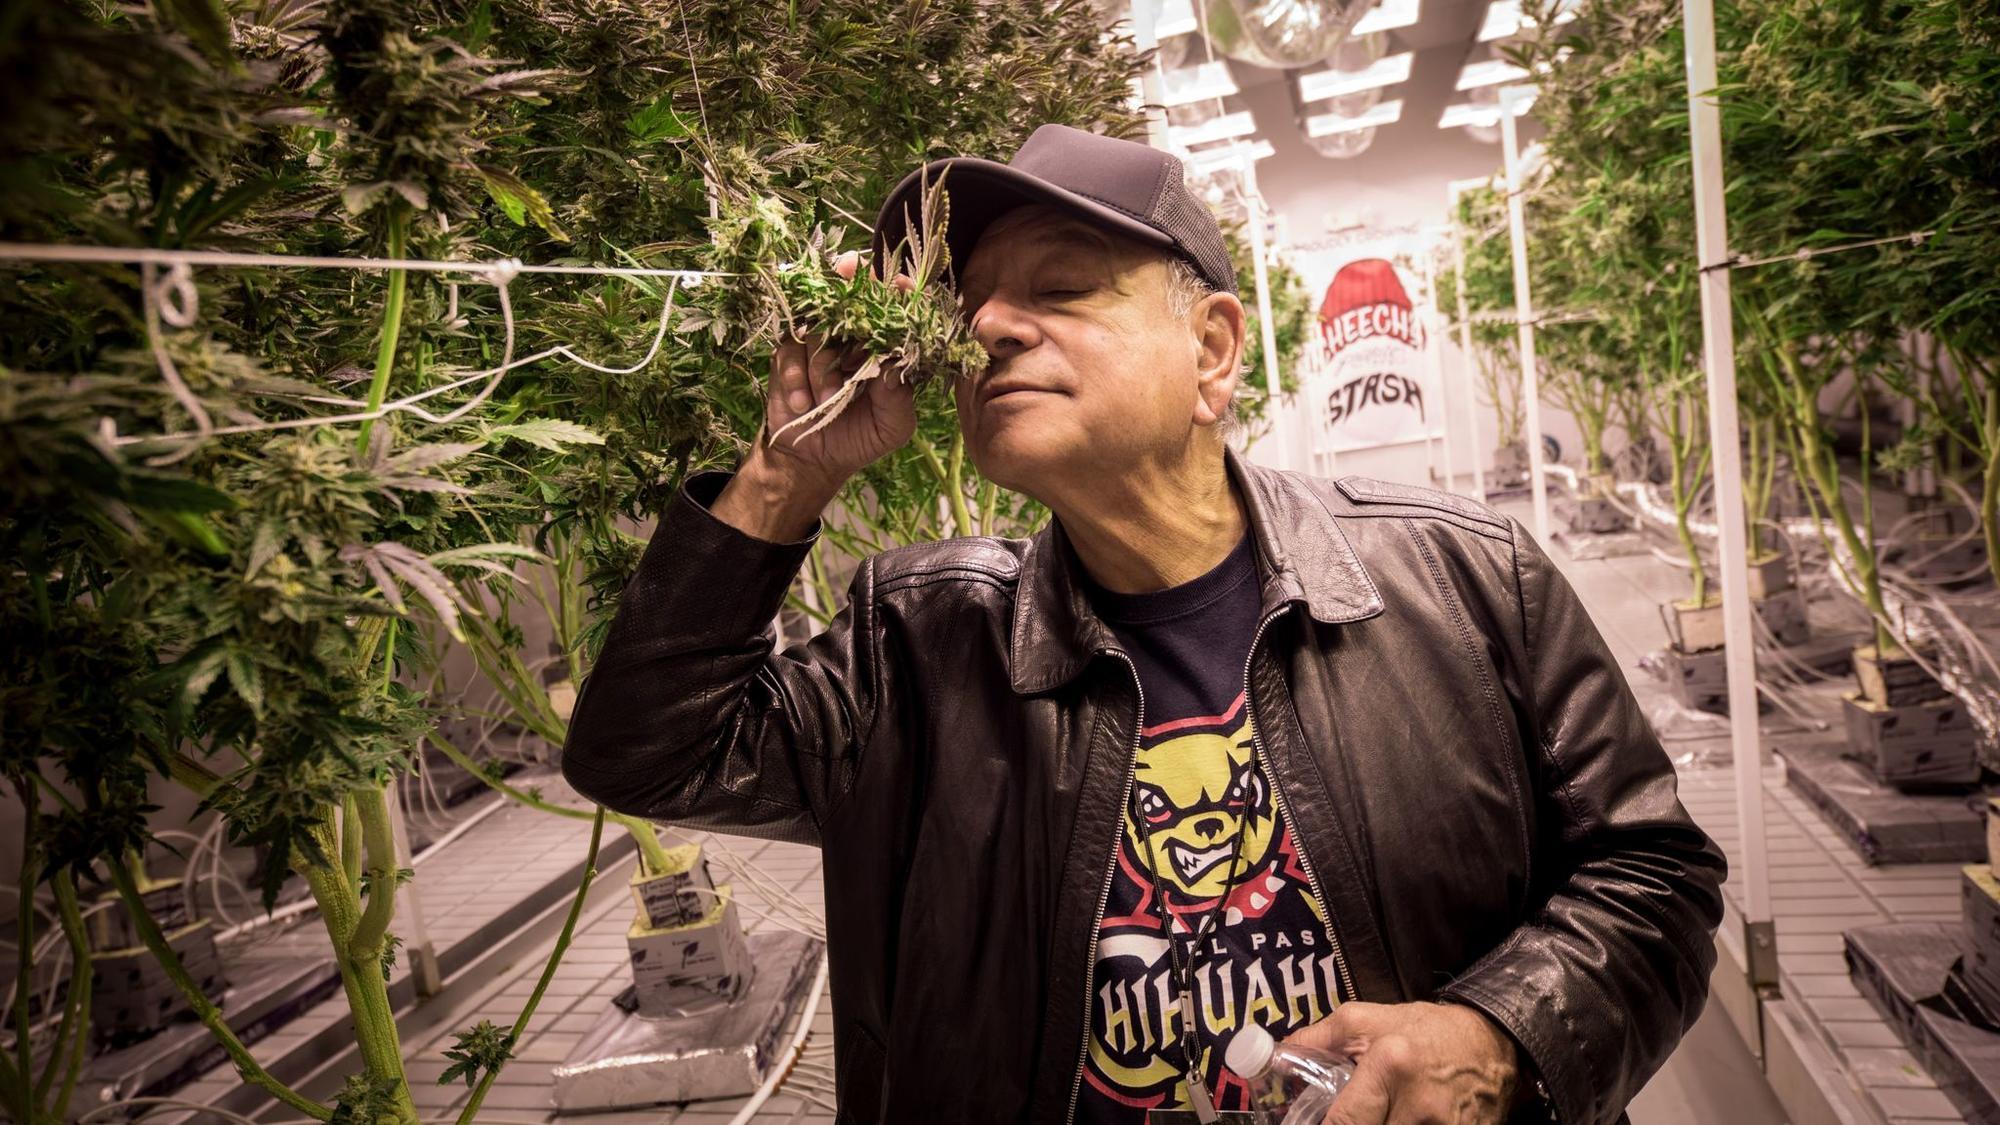 Cheech Marin is cool with pot and America's 'middle,' but don't get him started on ...2000 x 1125